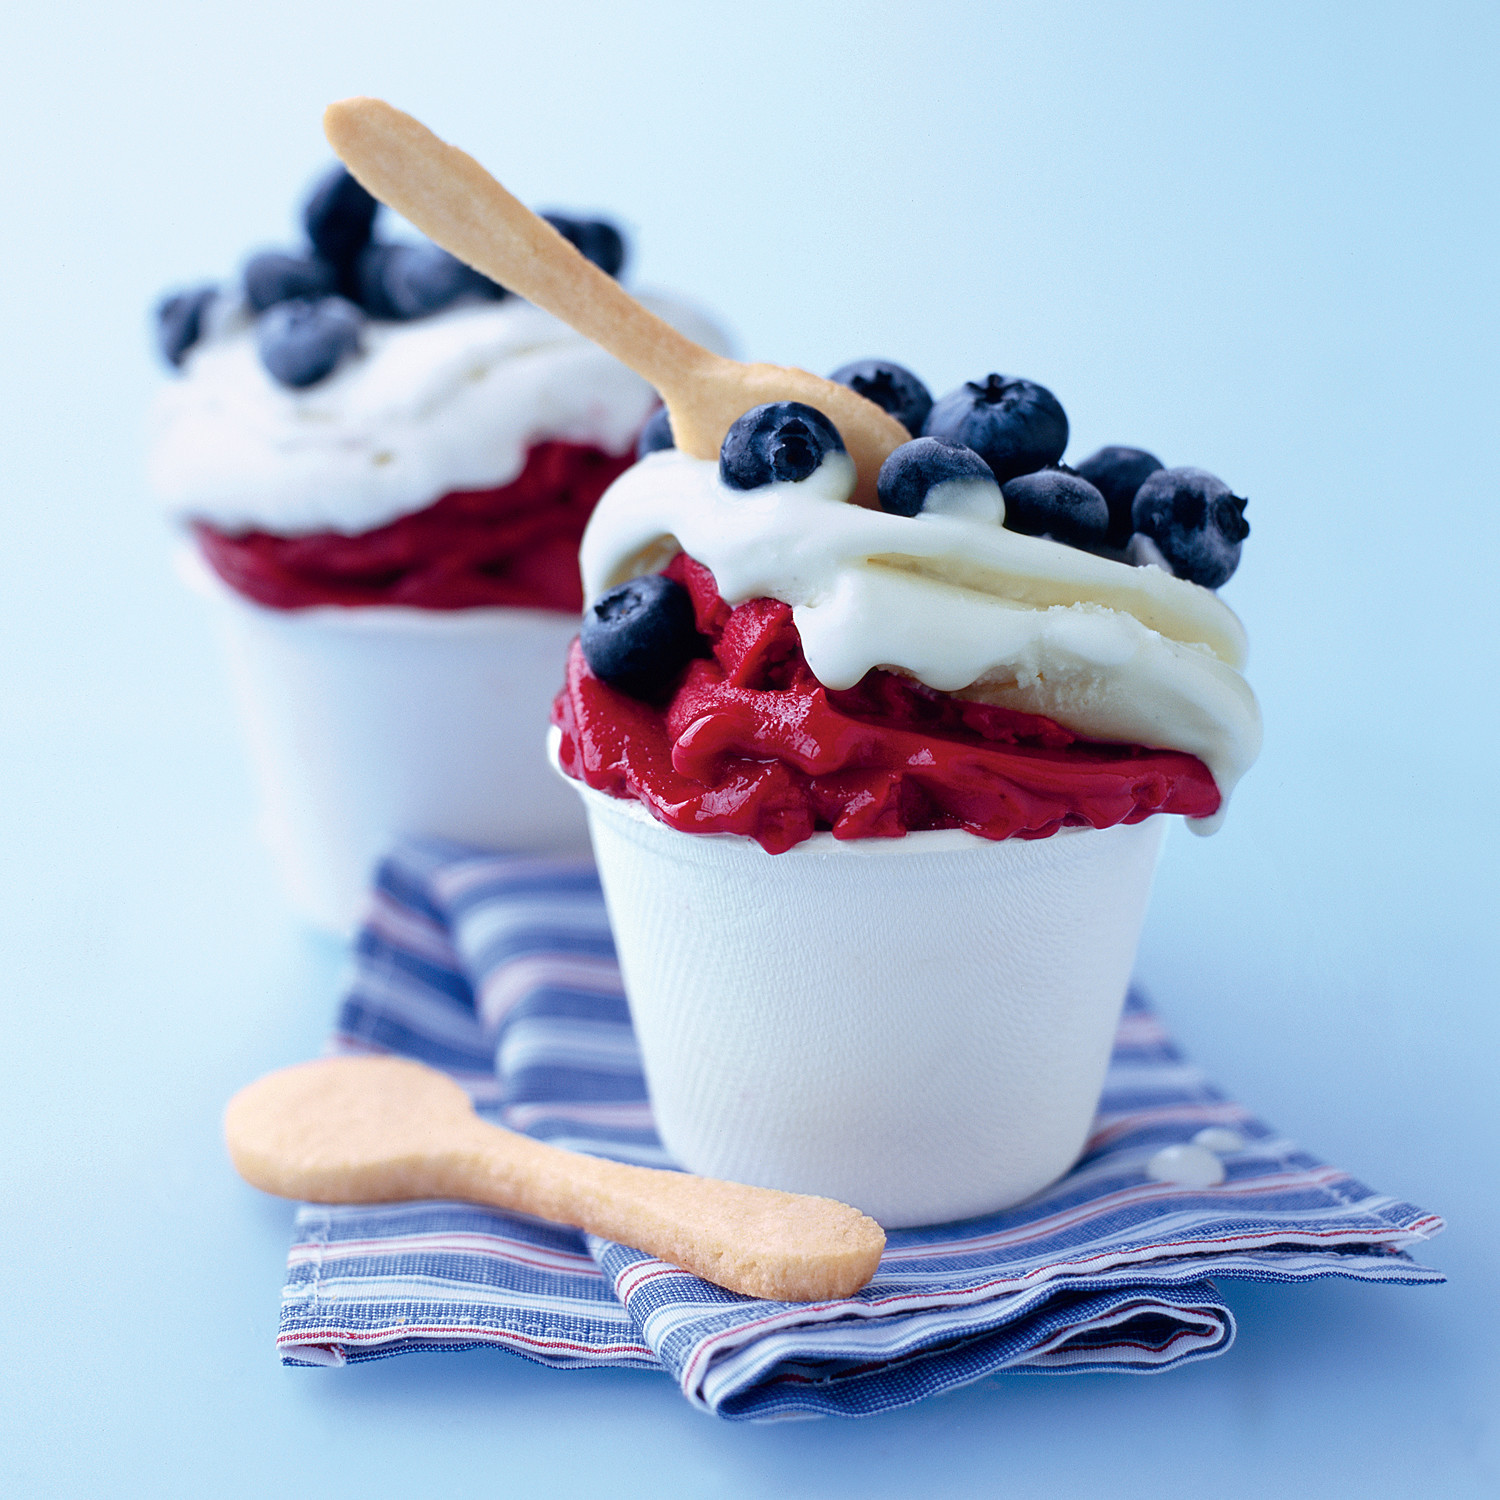 Red White And Blue Desserts Recipes
 Most Pinned Red White and Blue Dessert Recipes